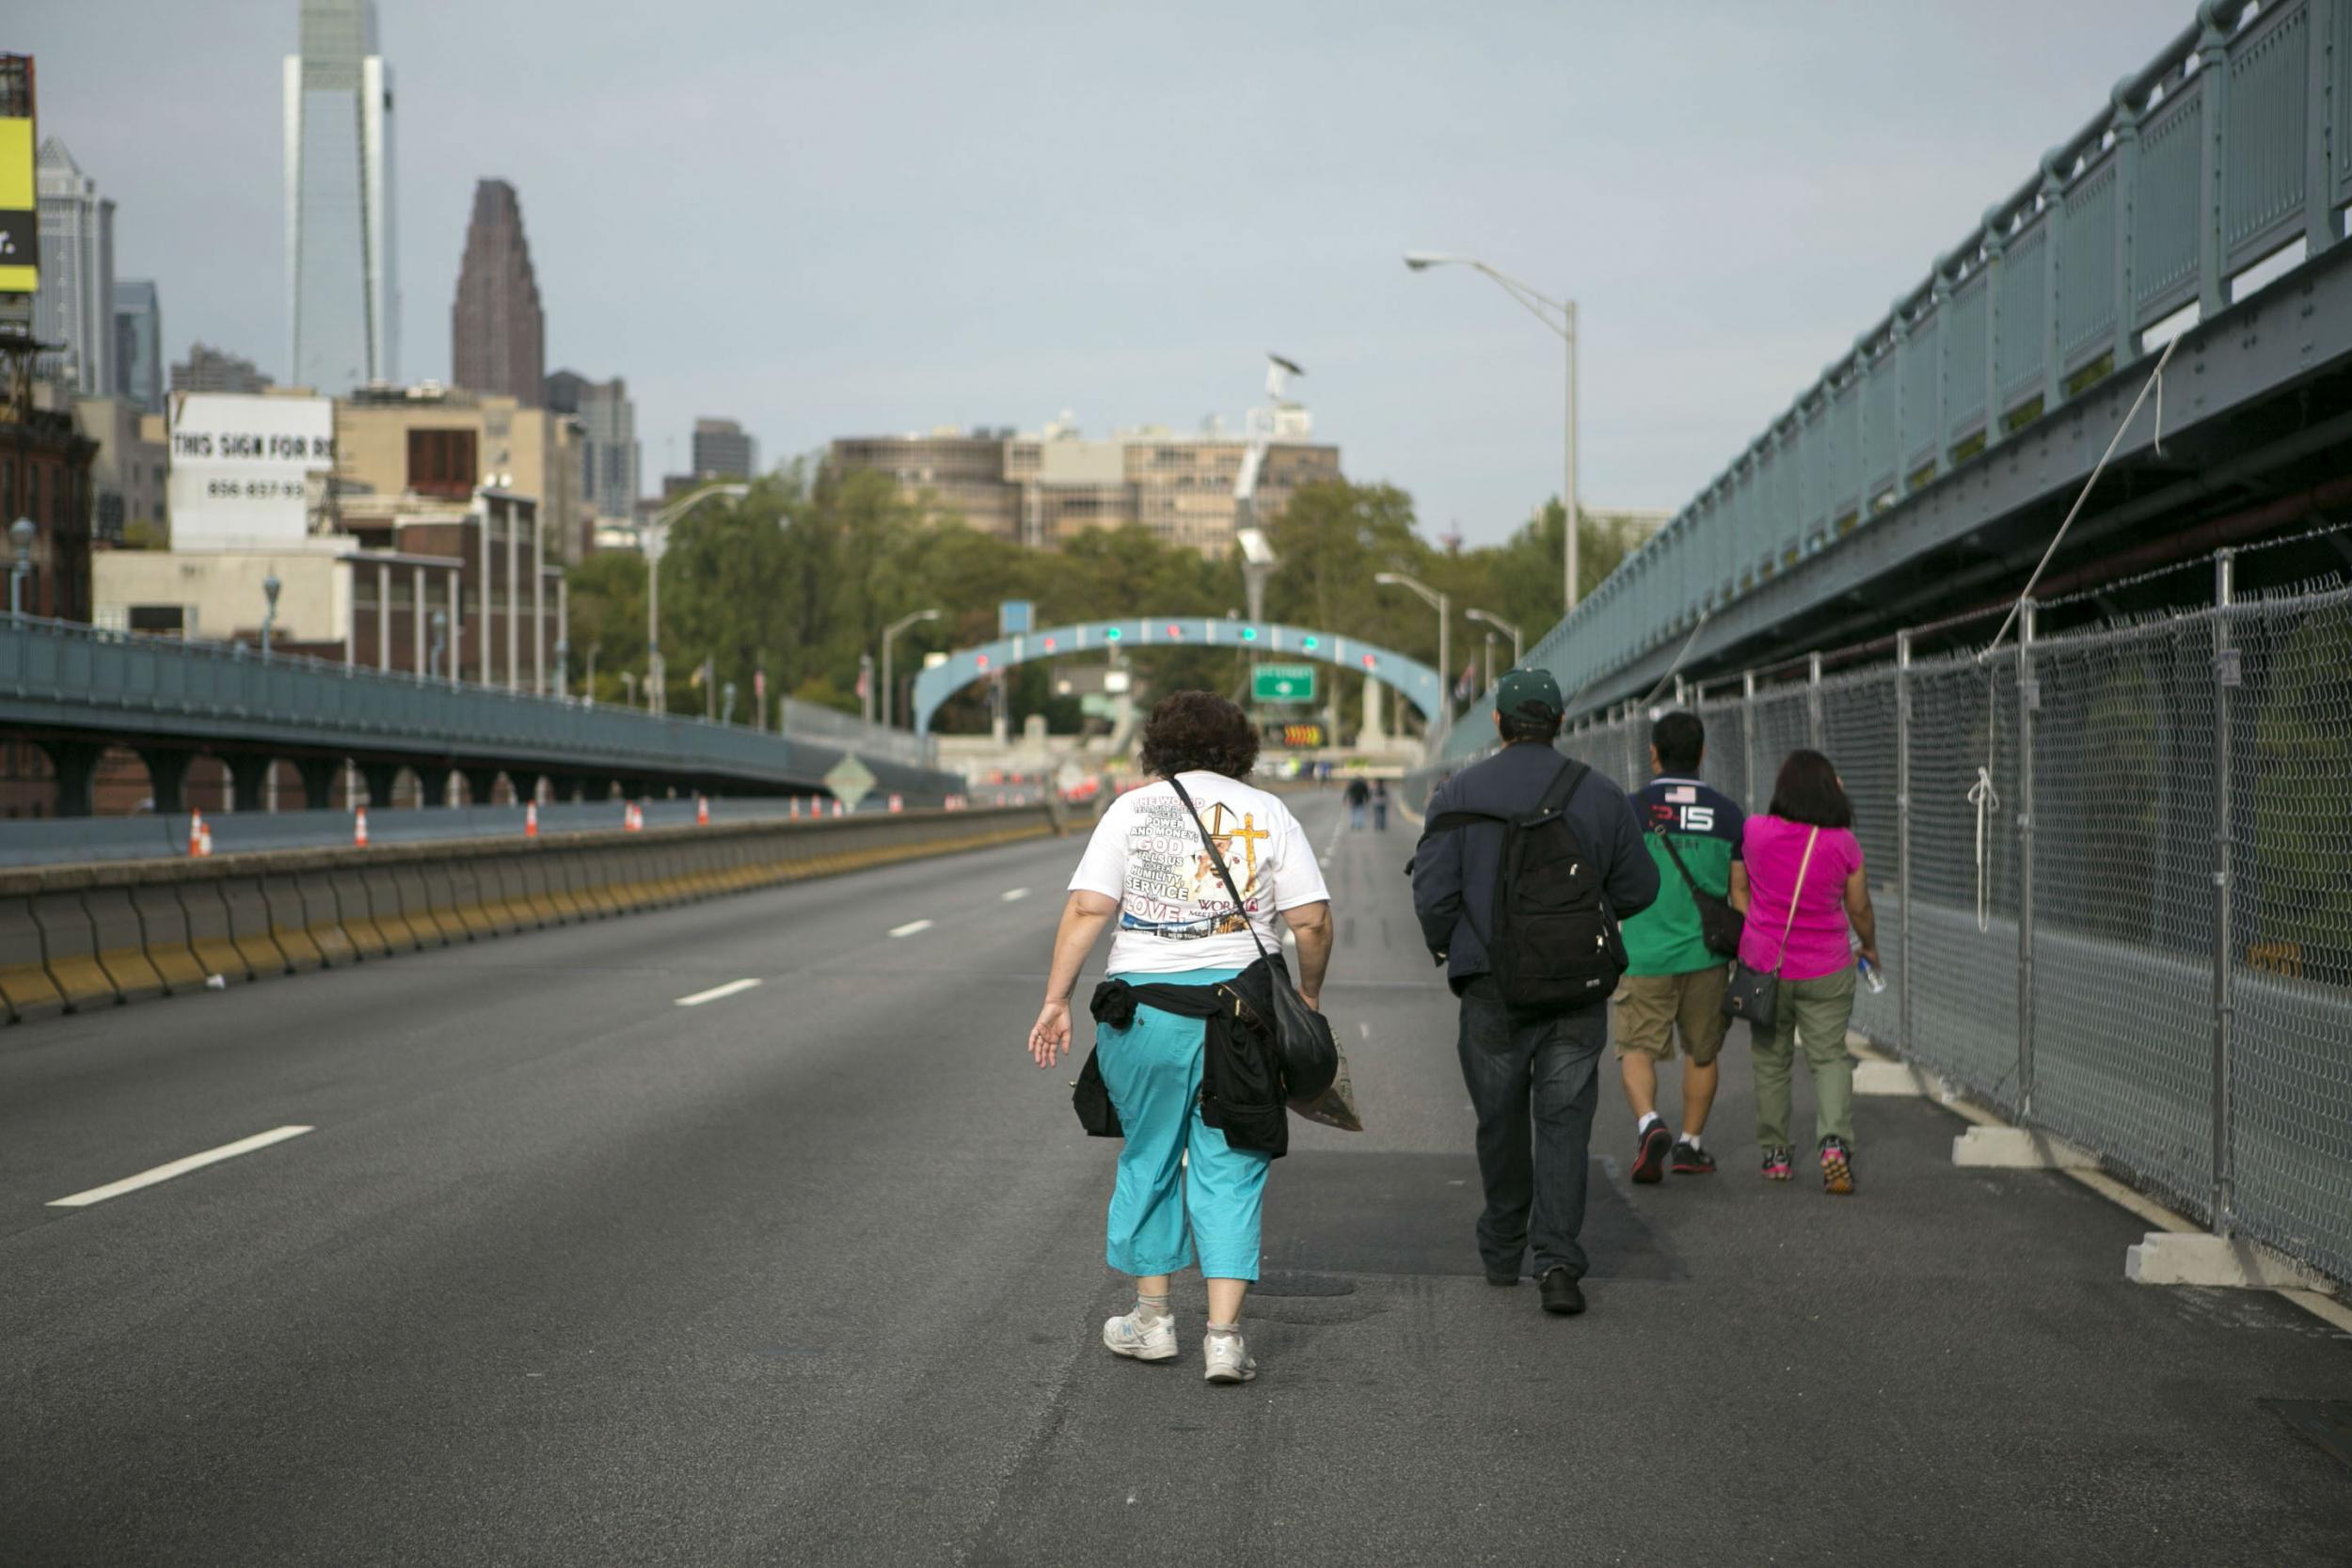 Philly's streets were car free during Pope Francis' visit last year